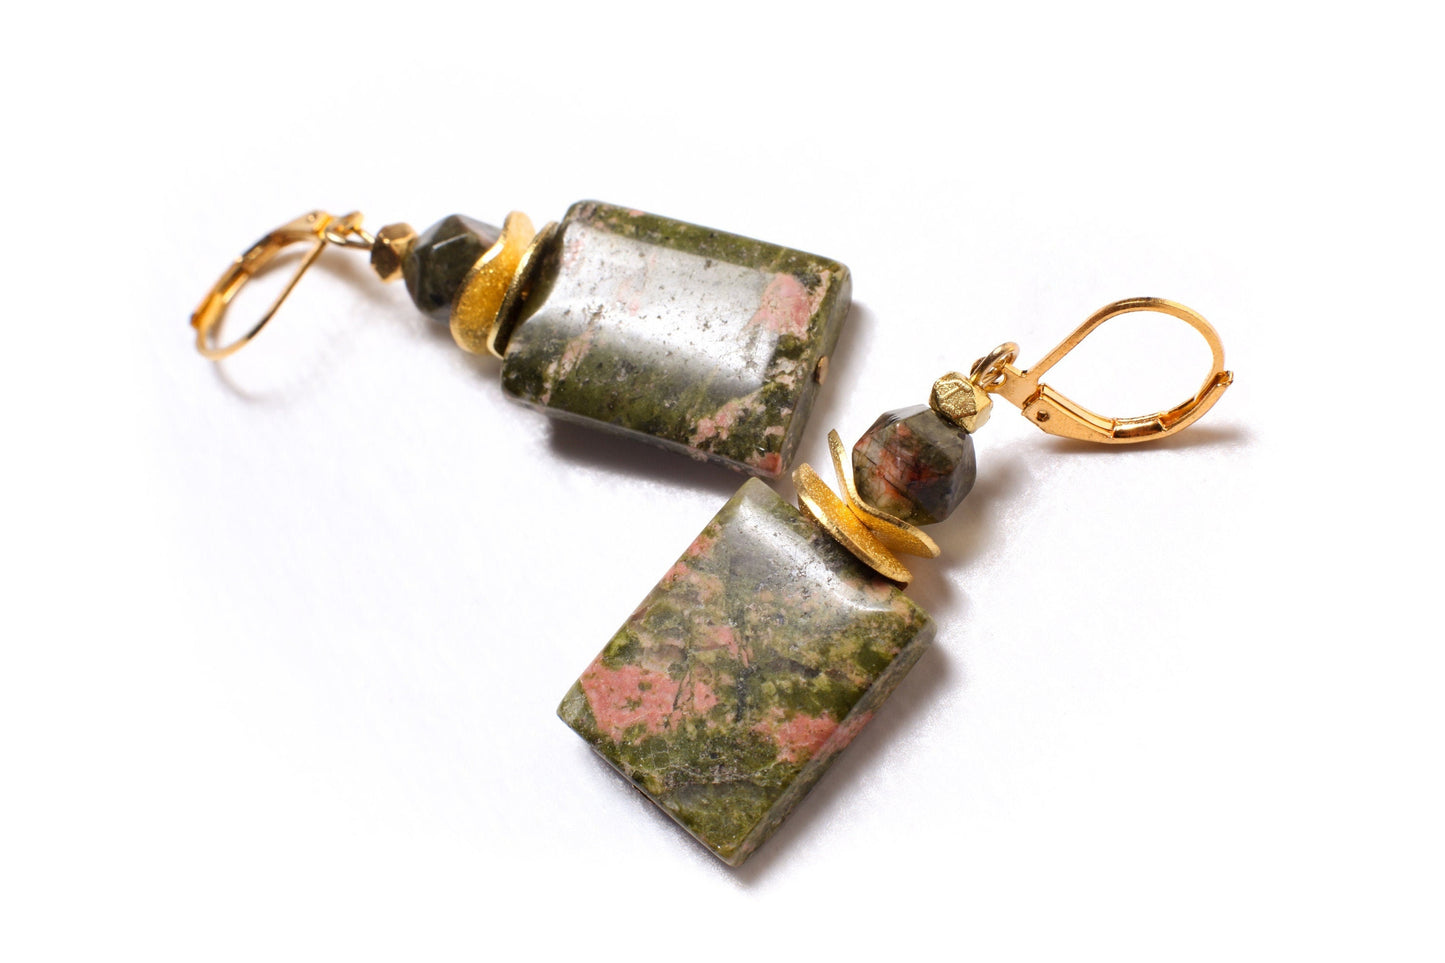 Genuine Unakite 15x20mm Rectangle Gemstone Earrings, with Gold Brushed Spacer Disk, 6mm Unakite Octagon Gold Leverback Earrings